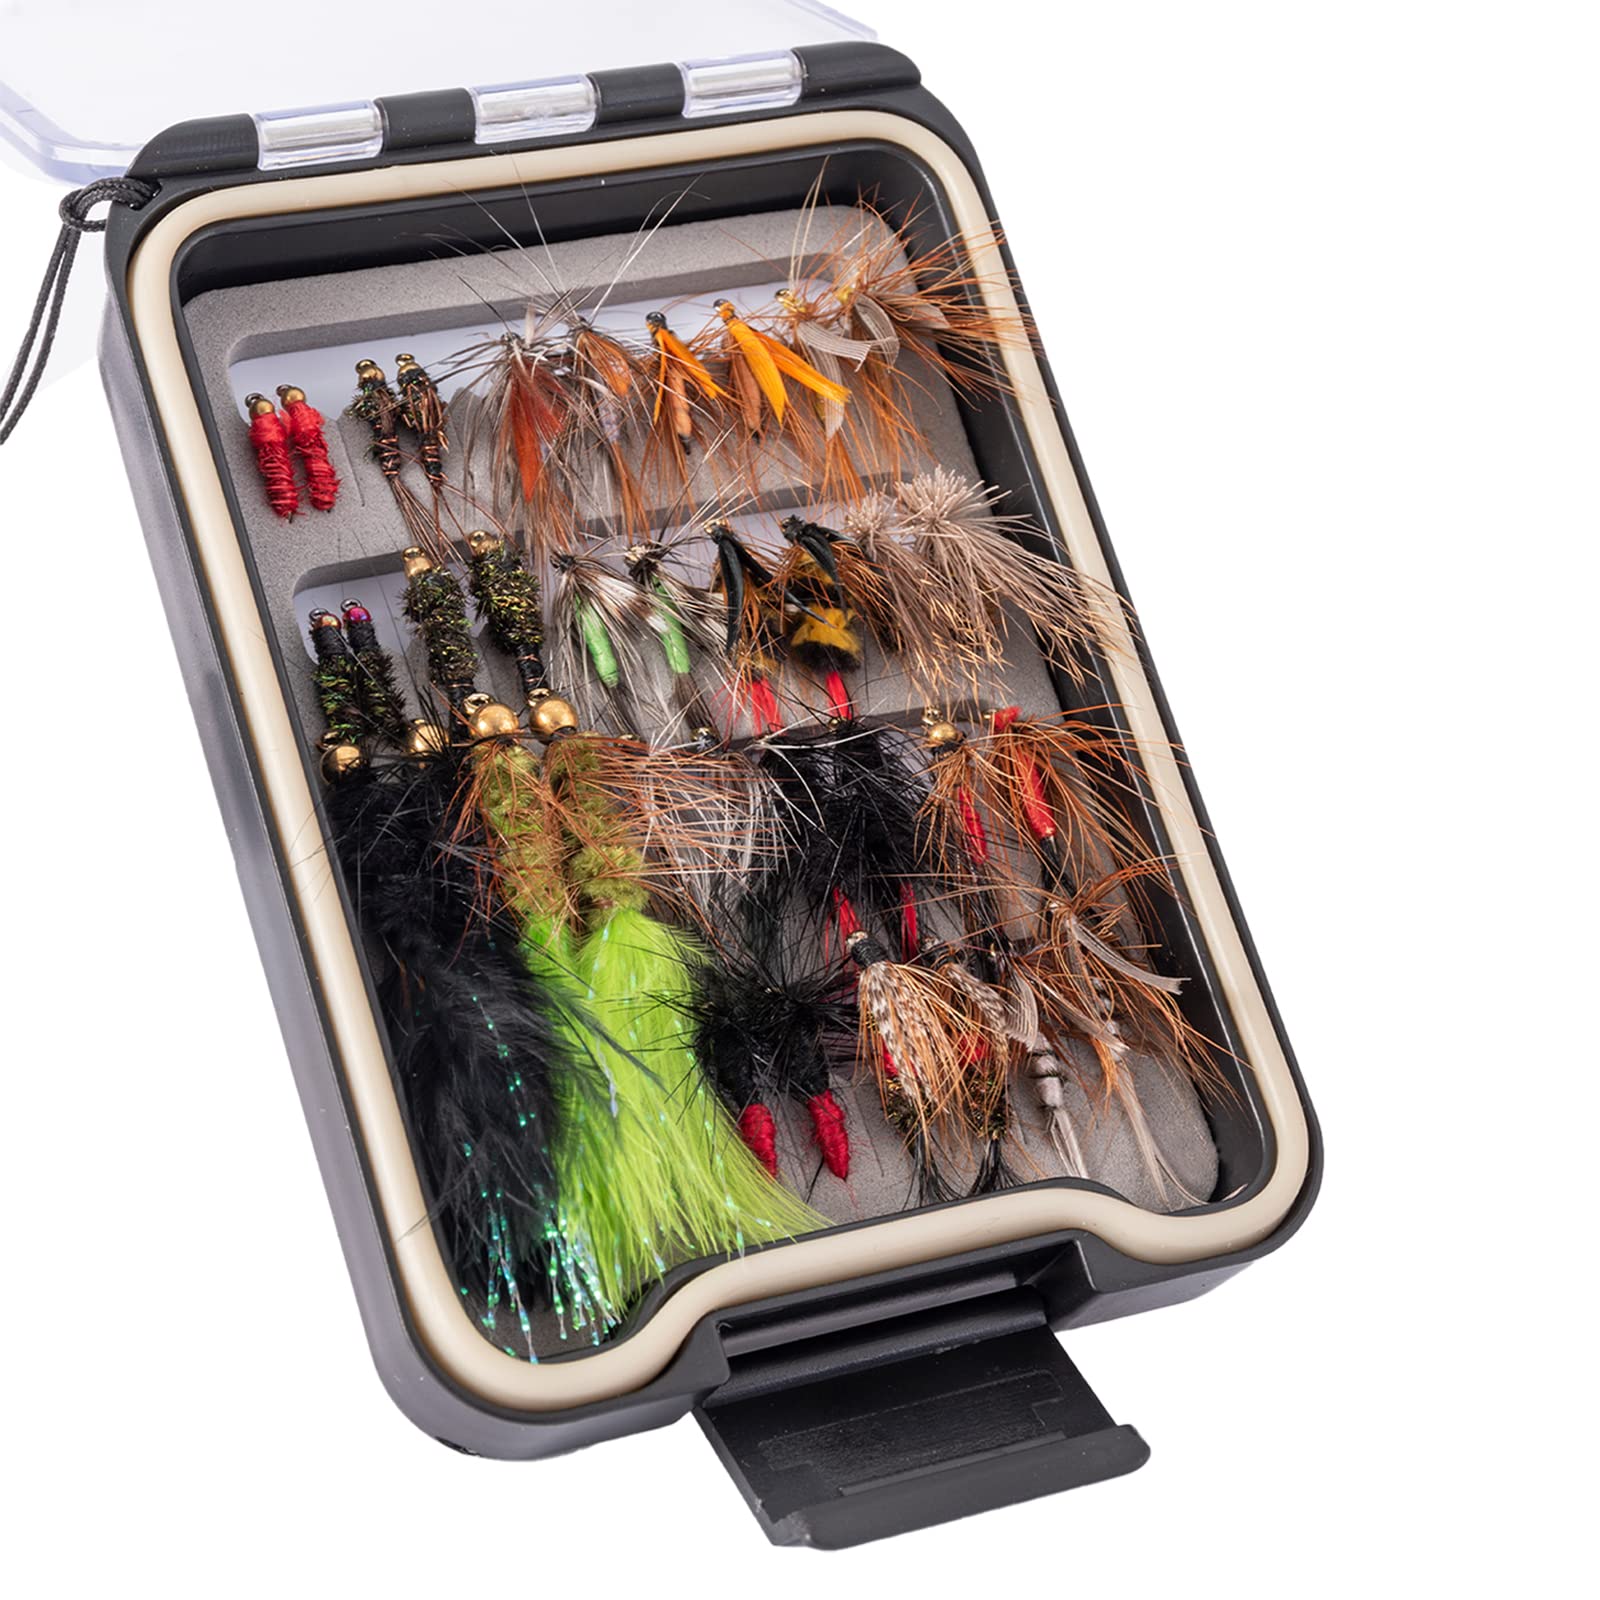 184Pcs Assorted Fishing Fly Case Set Wet Dry Nymph Fly Fishing